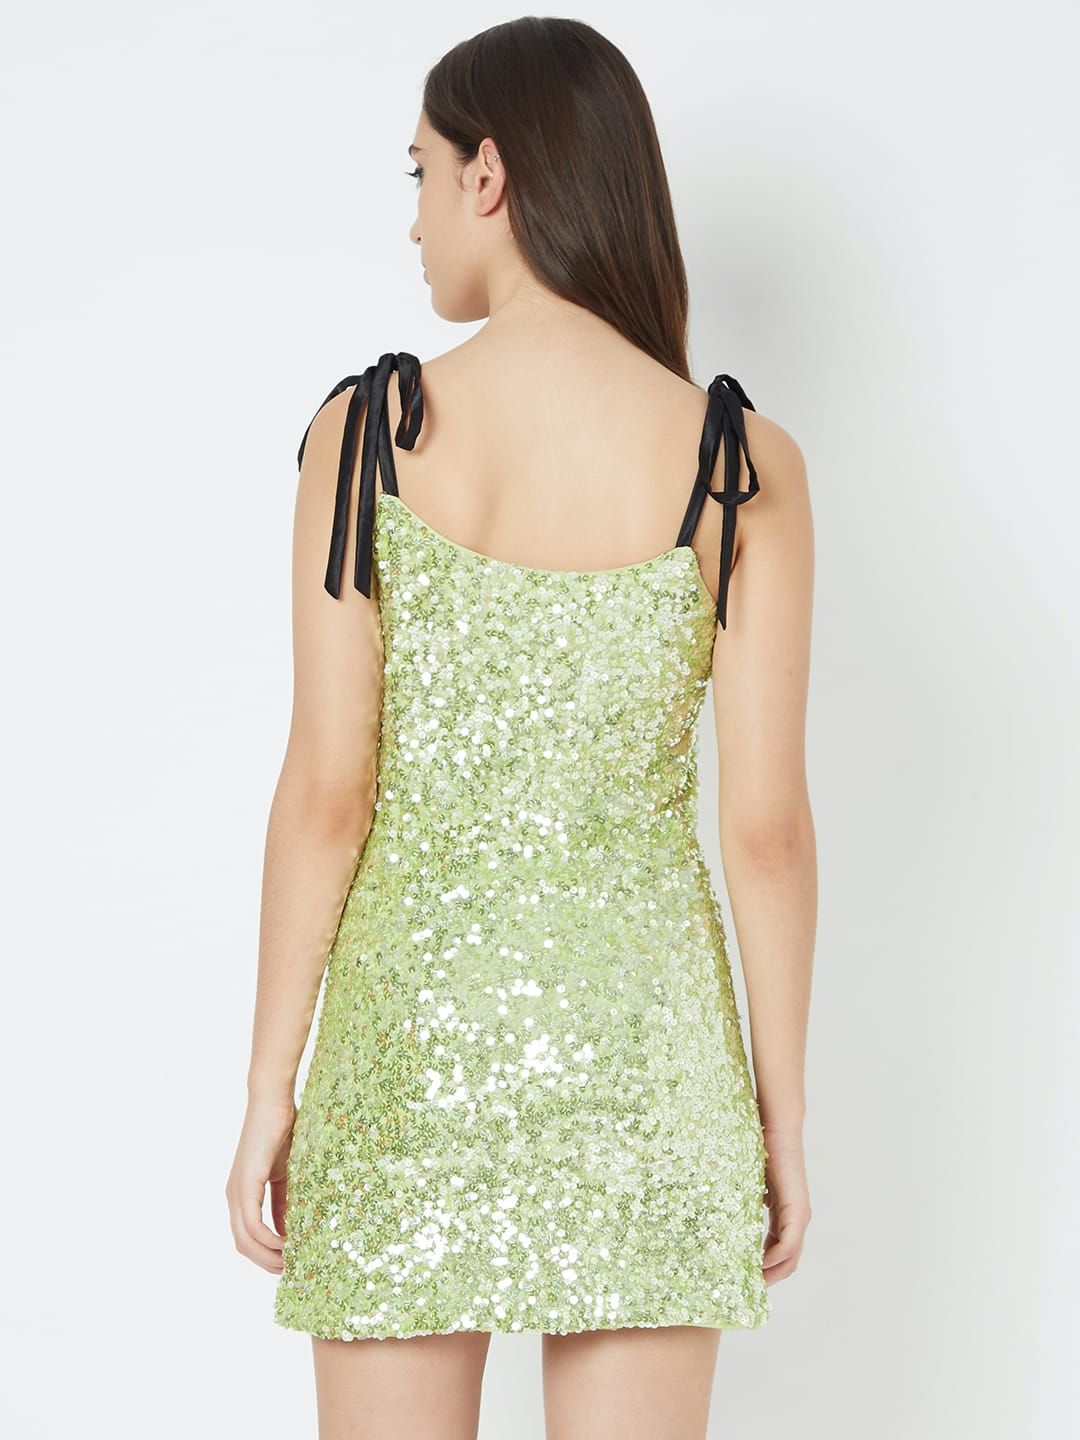 The Shoshana Sequin Party dress - Reema Anand Label